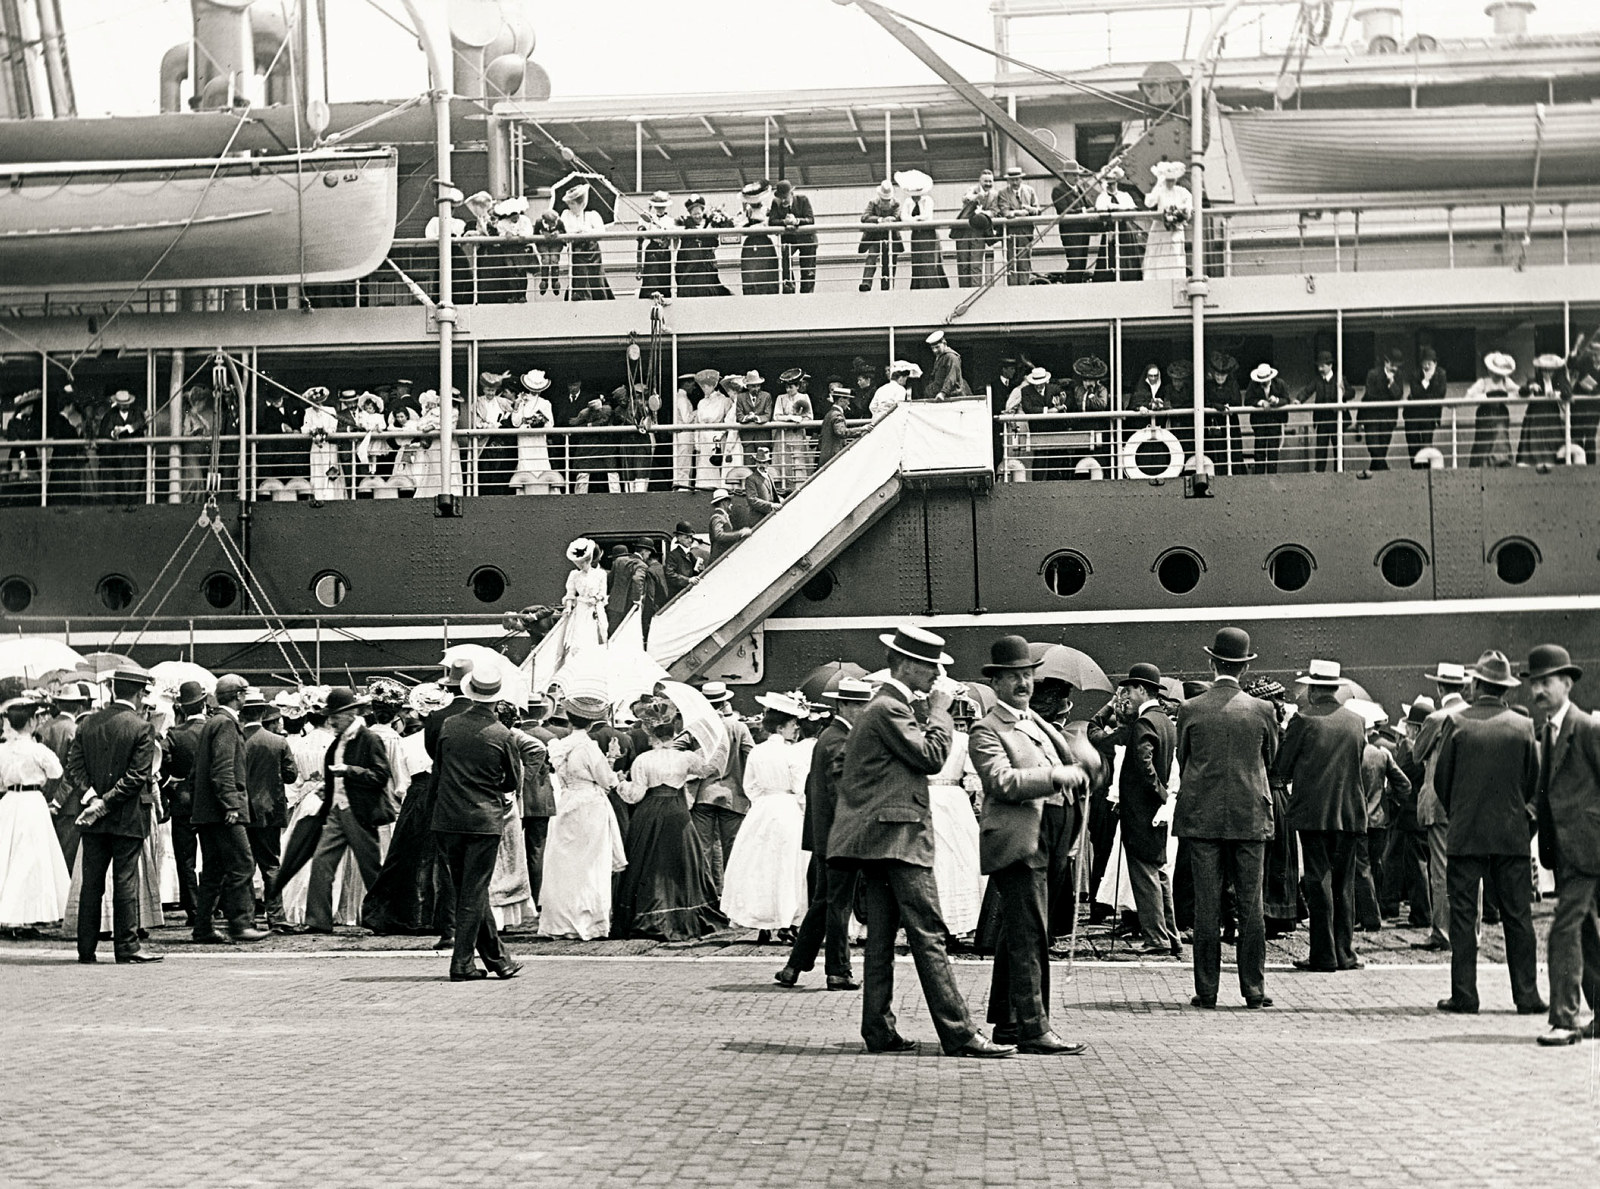 A crowd farewells a large ship at a dock. Two men walk in the foreground wearing suits, waistcoats and hats.